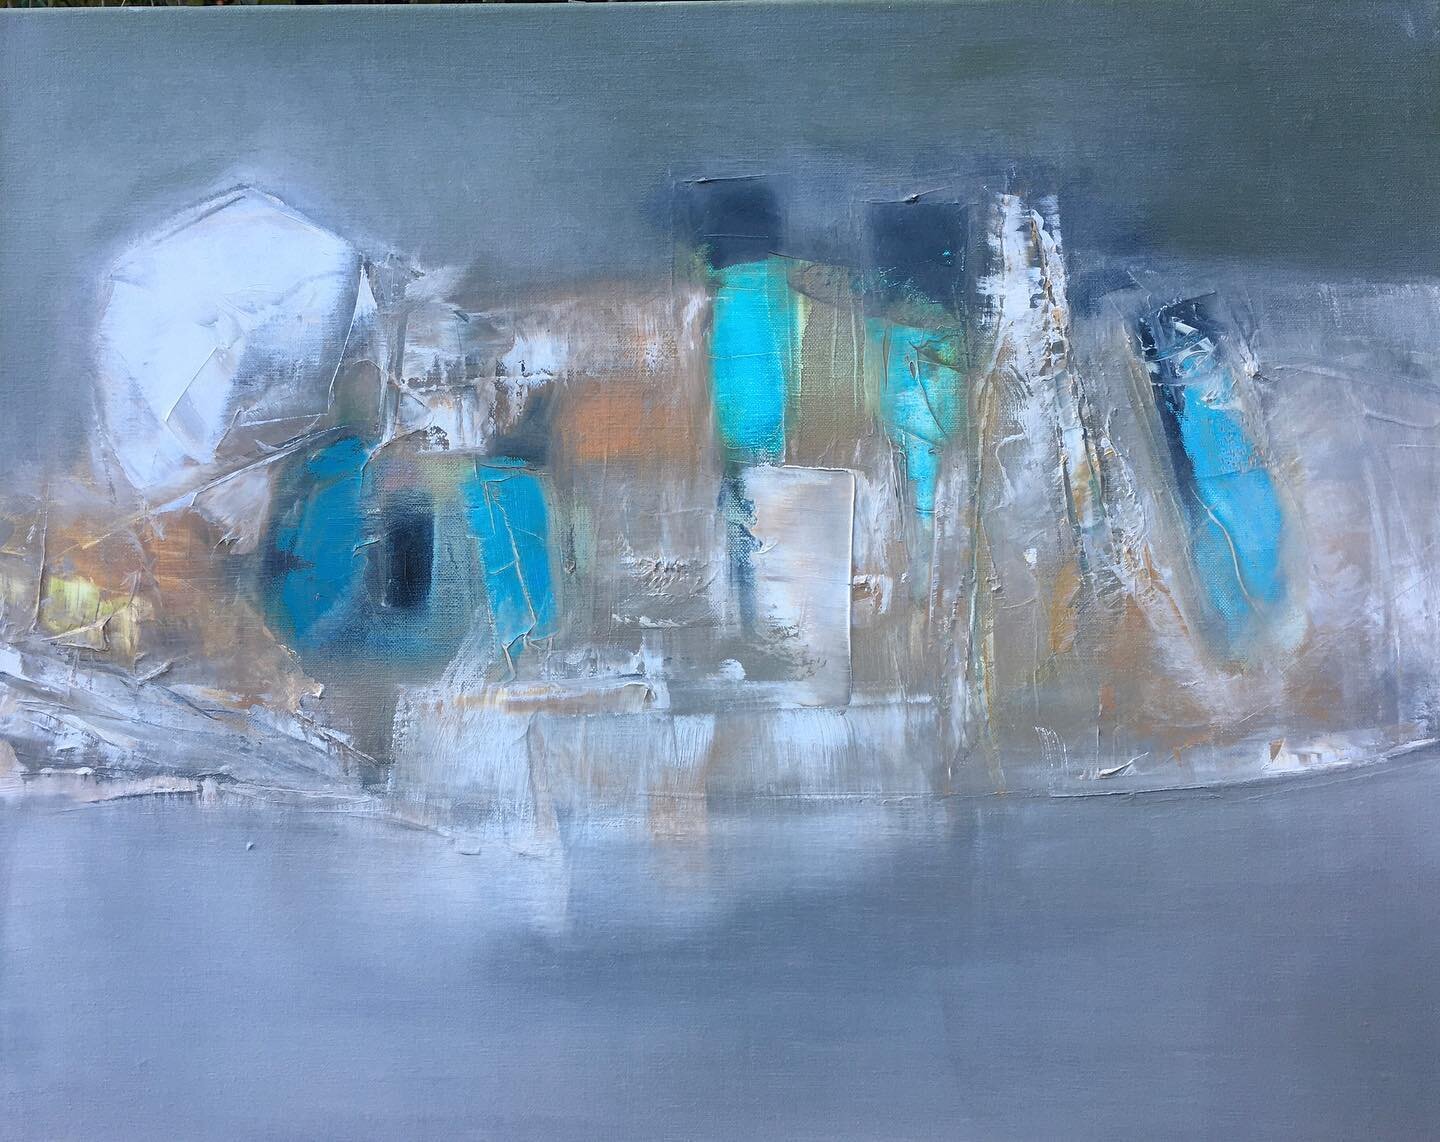 Jetsam. A painting from my 2020 Stream series....Oil on board. 38x51cm. More on my website: 
www.louise-holgate.com
#buyartonline
#abstractmag  #highgateart  #janenewberydulwich #chelseaartsclub #affordableartfairuk #somerset #colour #light #abstract